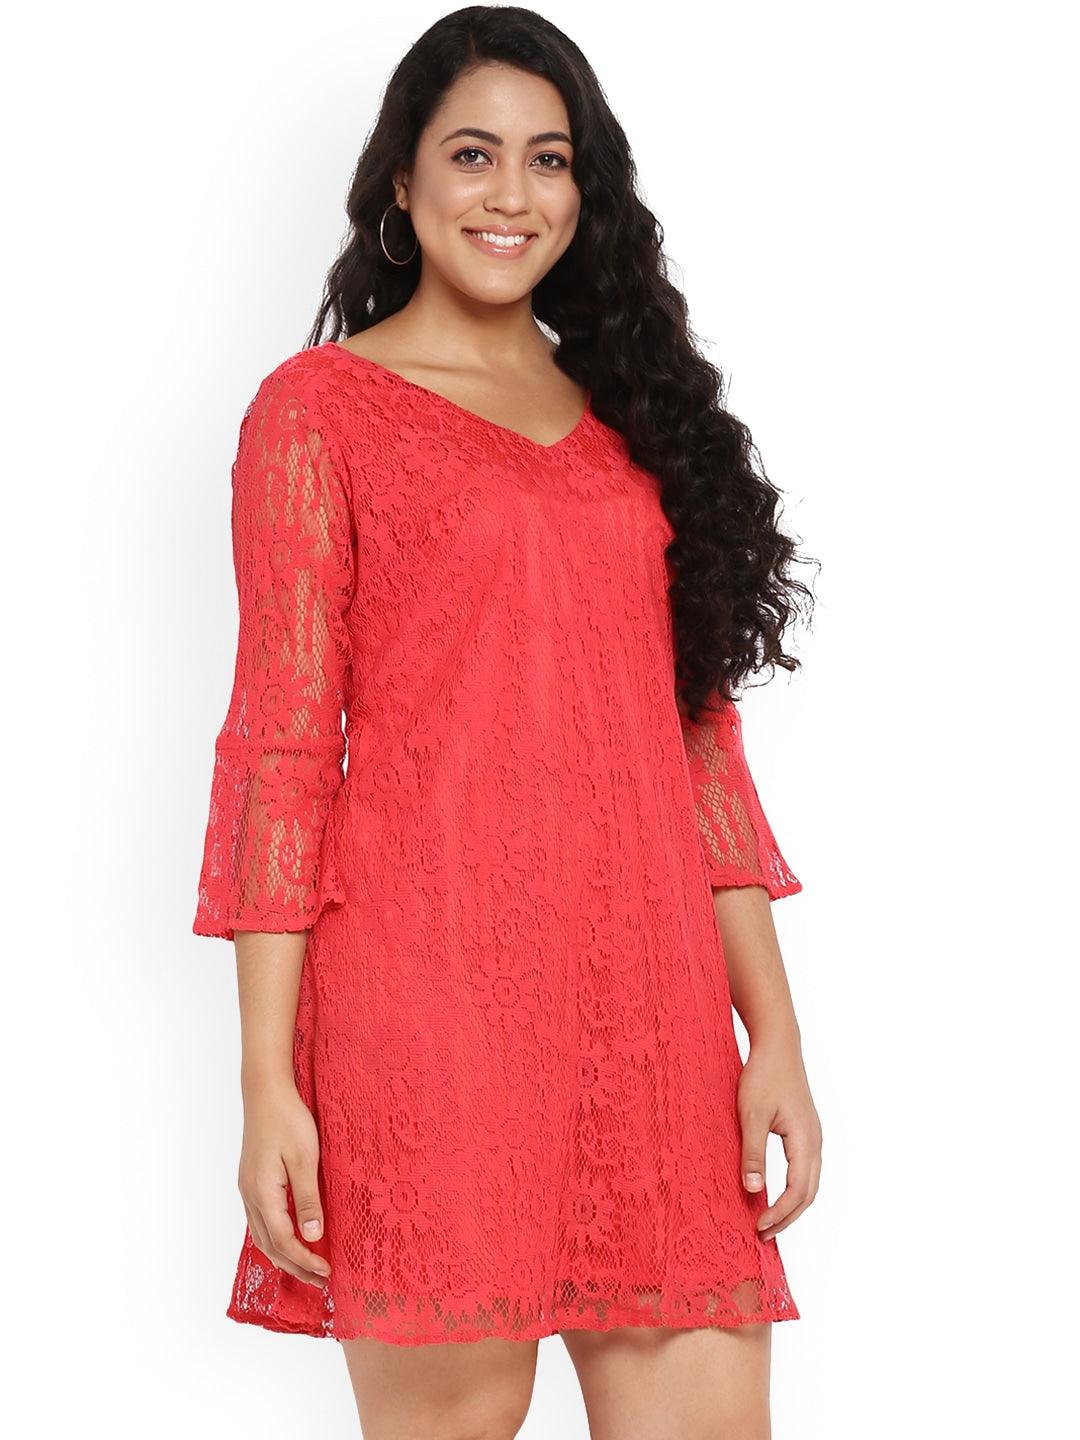 Qurvii Cherry Red Lace A-linee Dress - Qurvii India